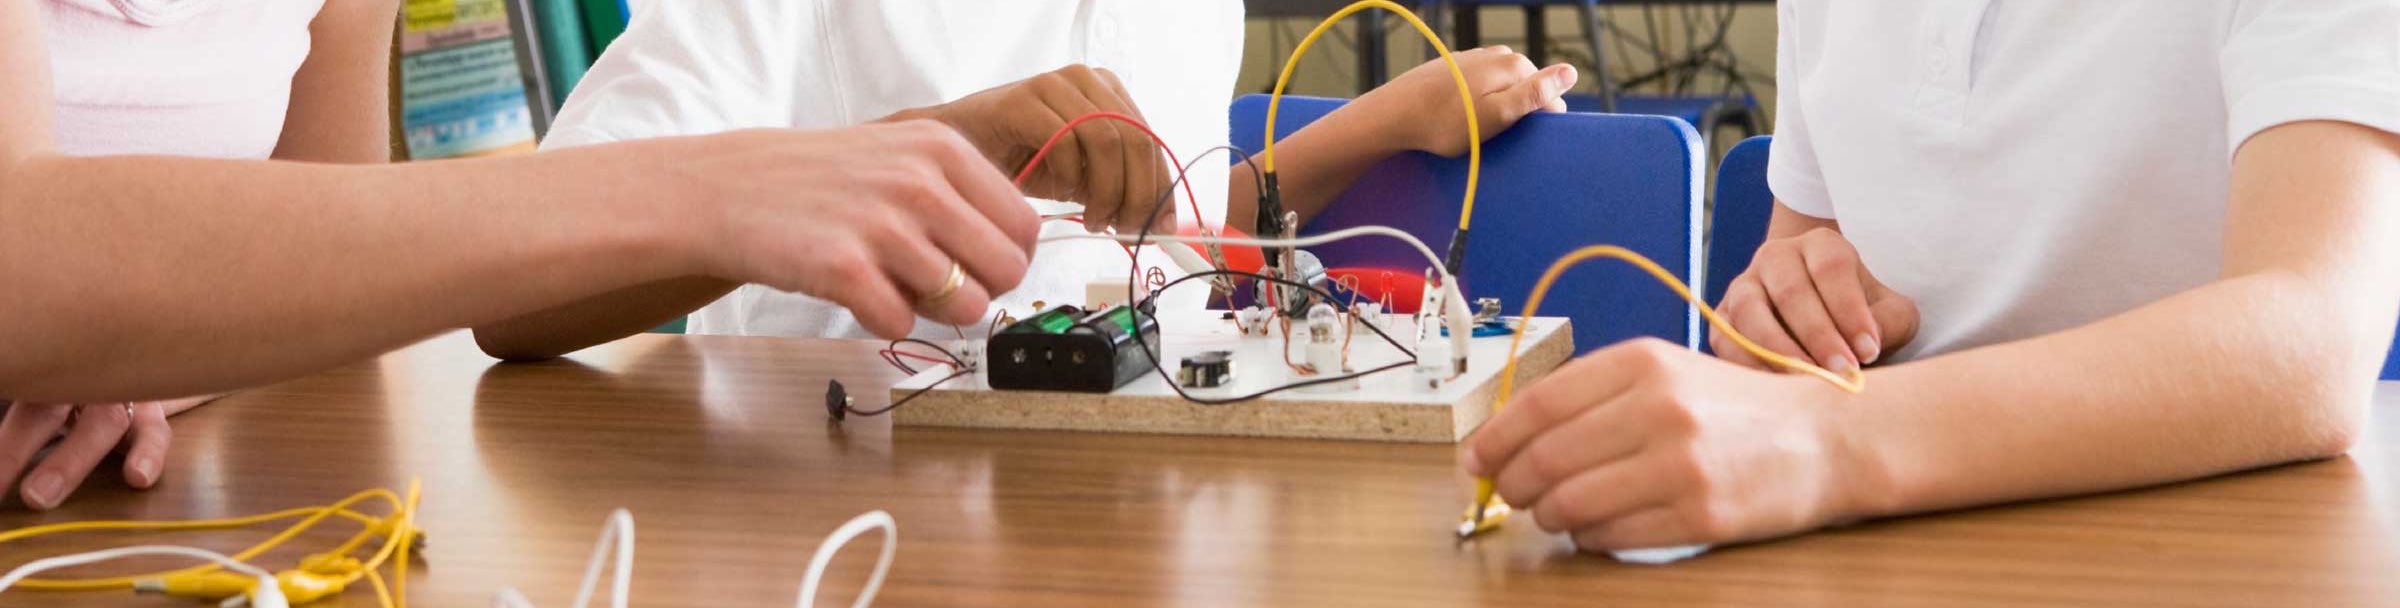 kids working with wires on a project